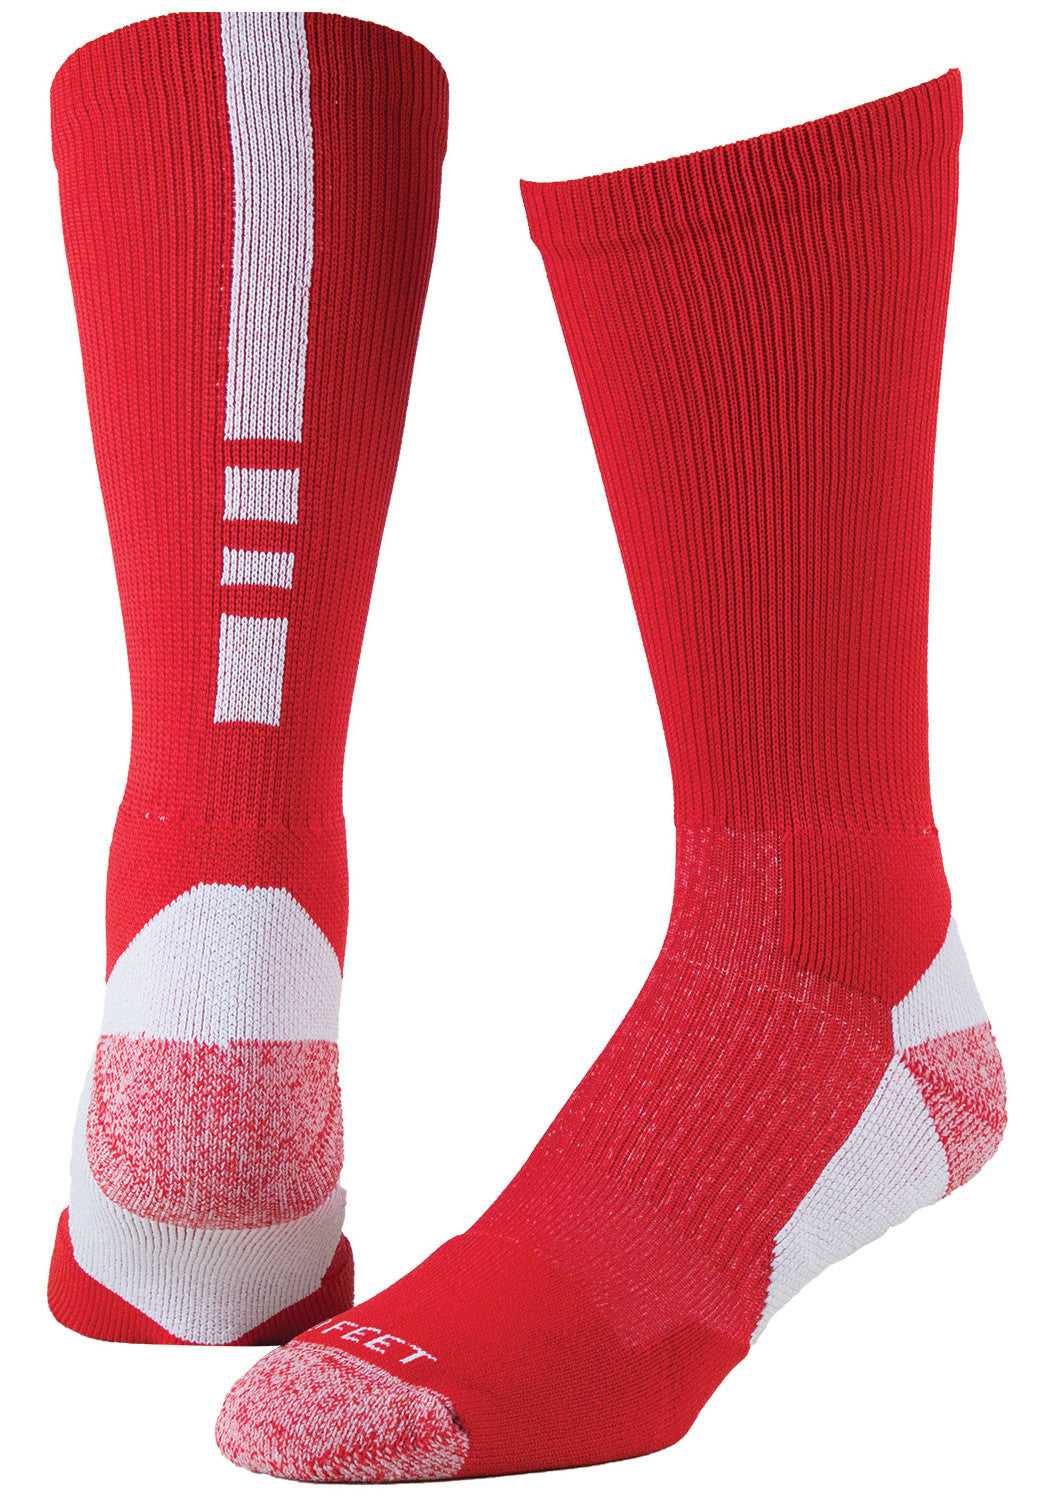 Pro Feet 238 Pro Feet Performance Shooter 2.0 Socks - Red White - HIT a Double